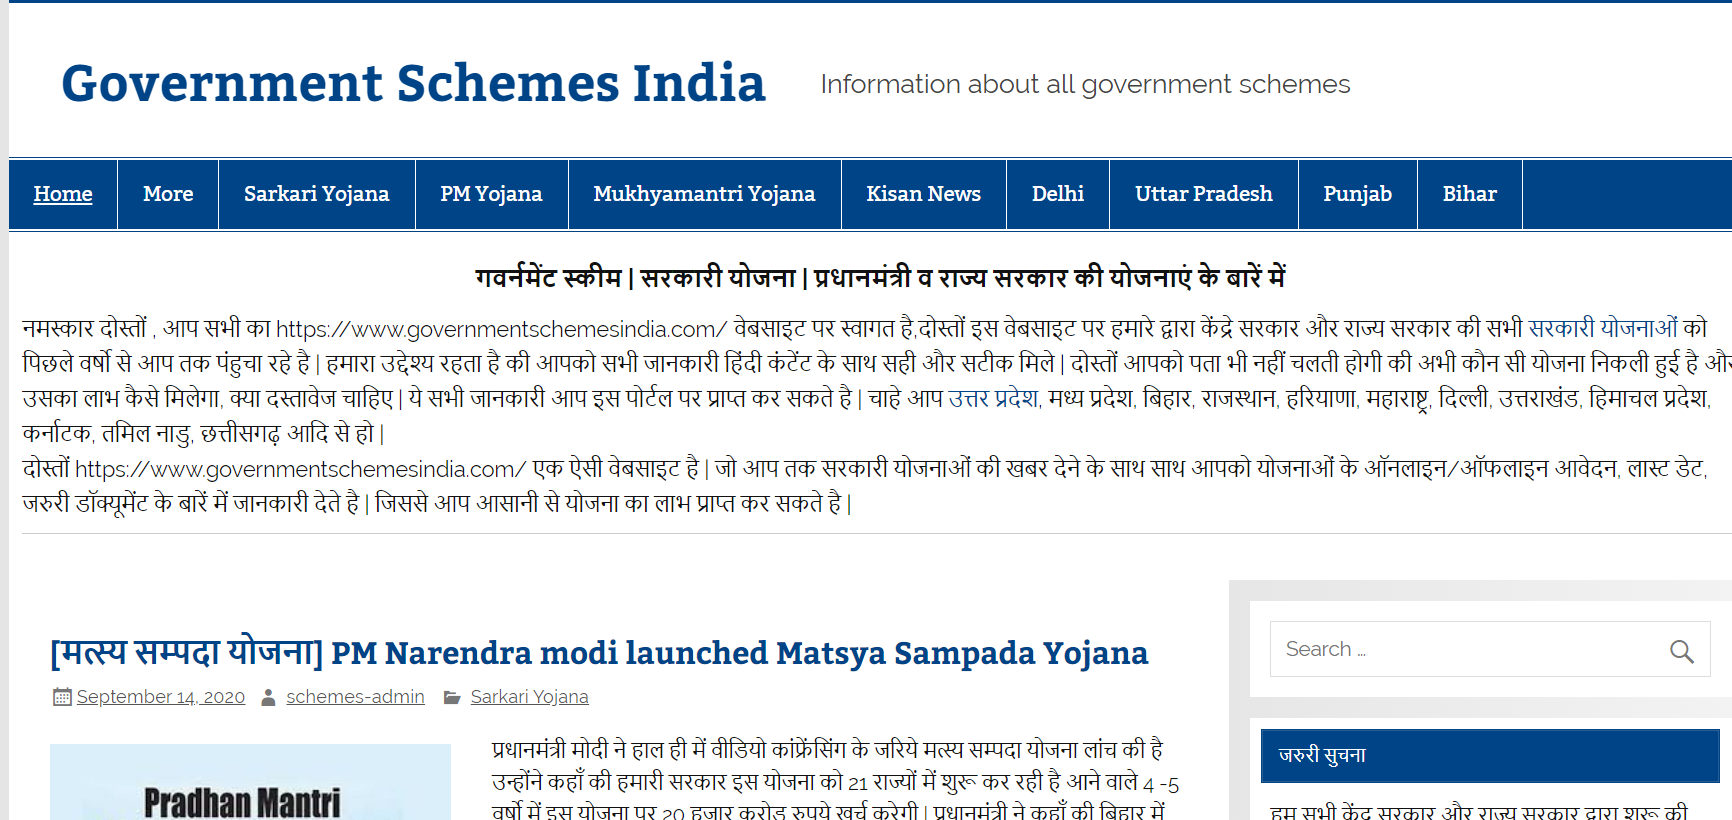 Government schemes india